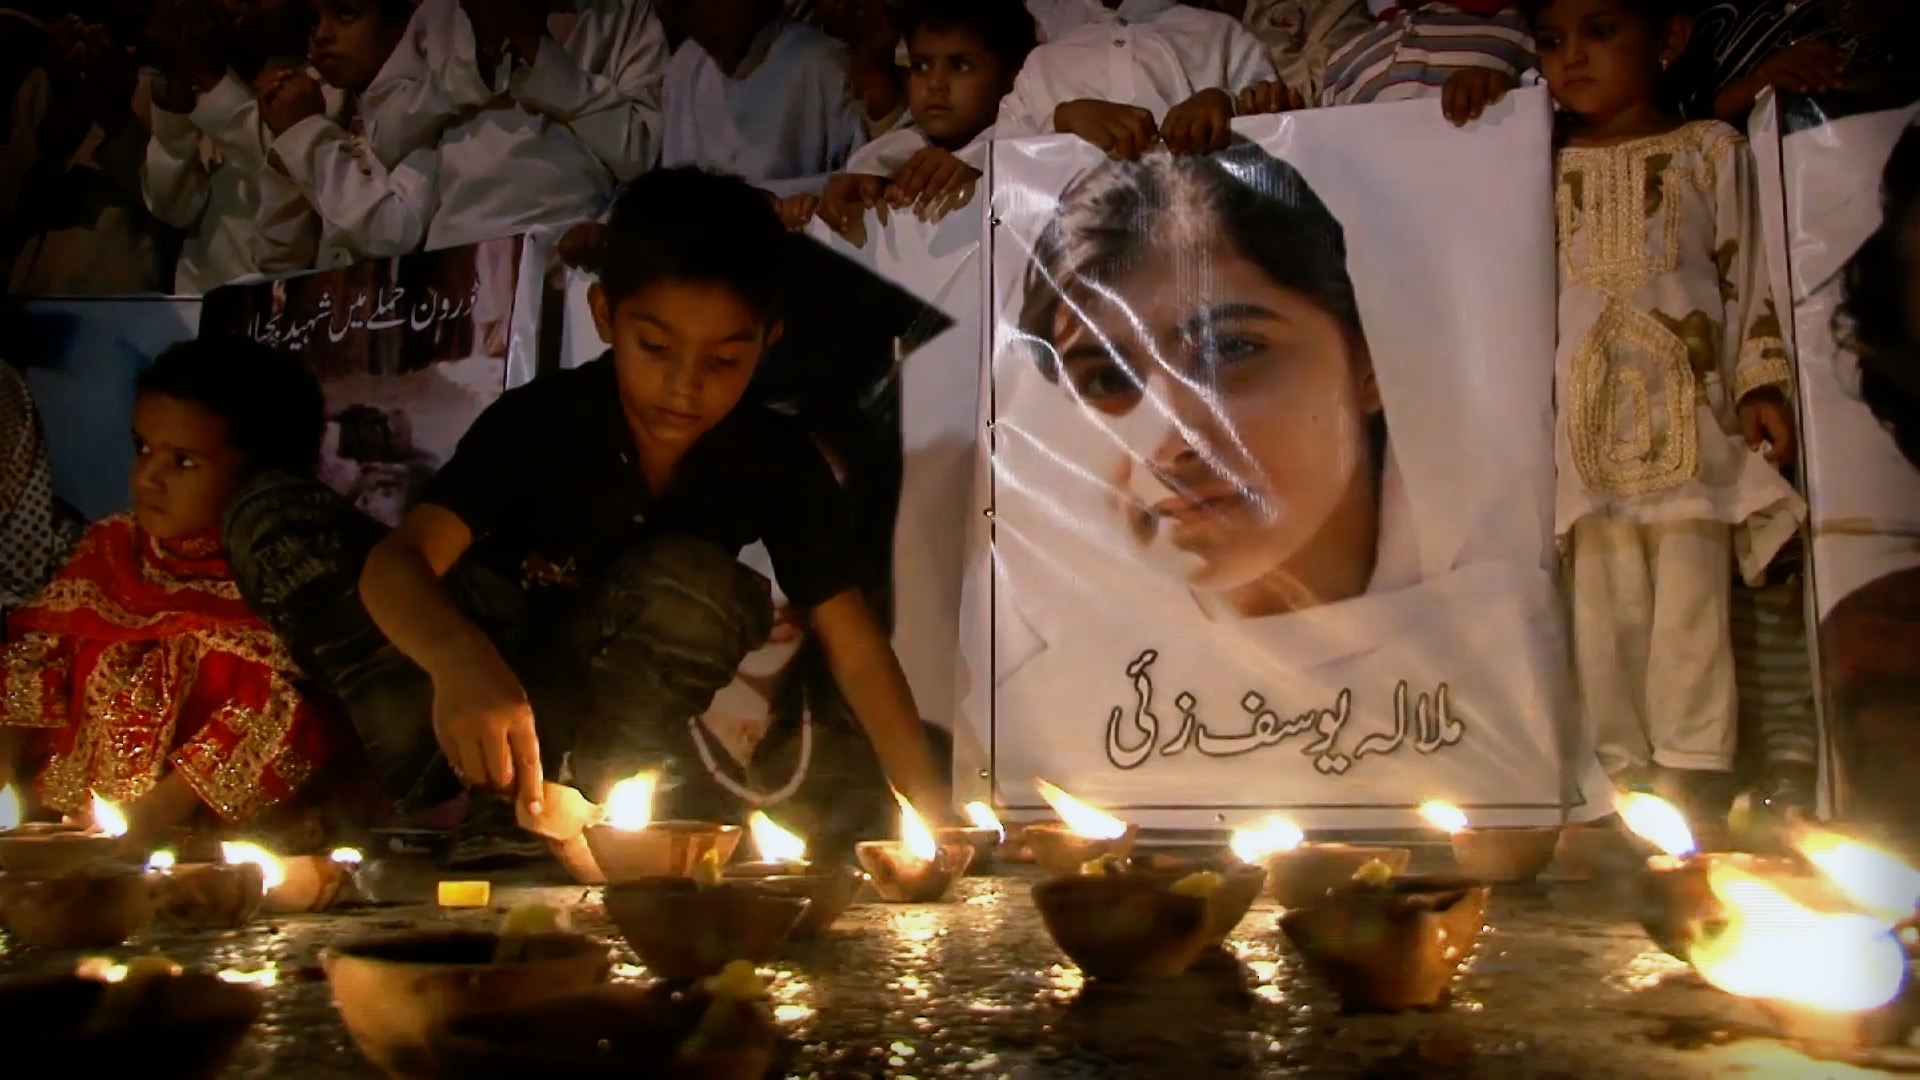 A vigil is held for Malala Yousafzai, the young Pakistani activist who survived being shot in the head by the TTP.